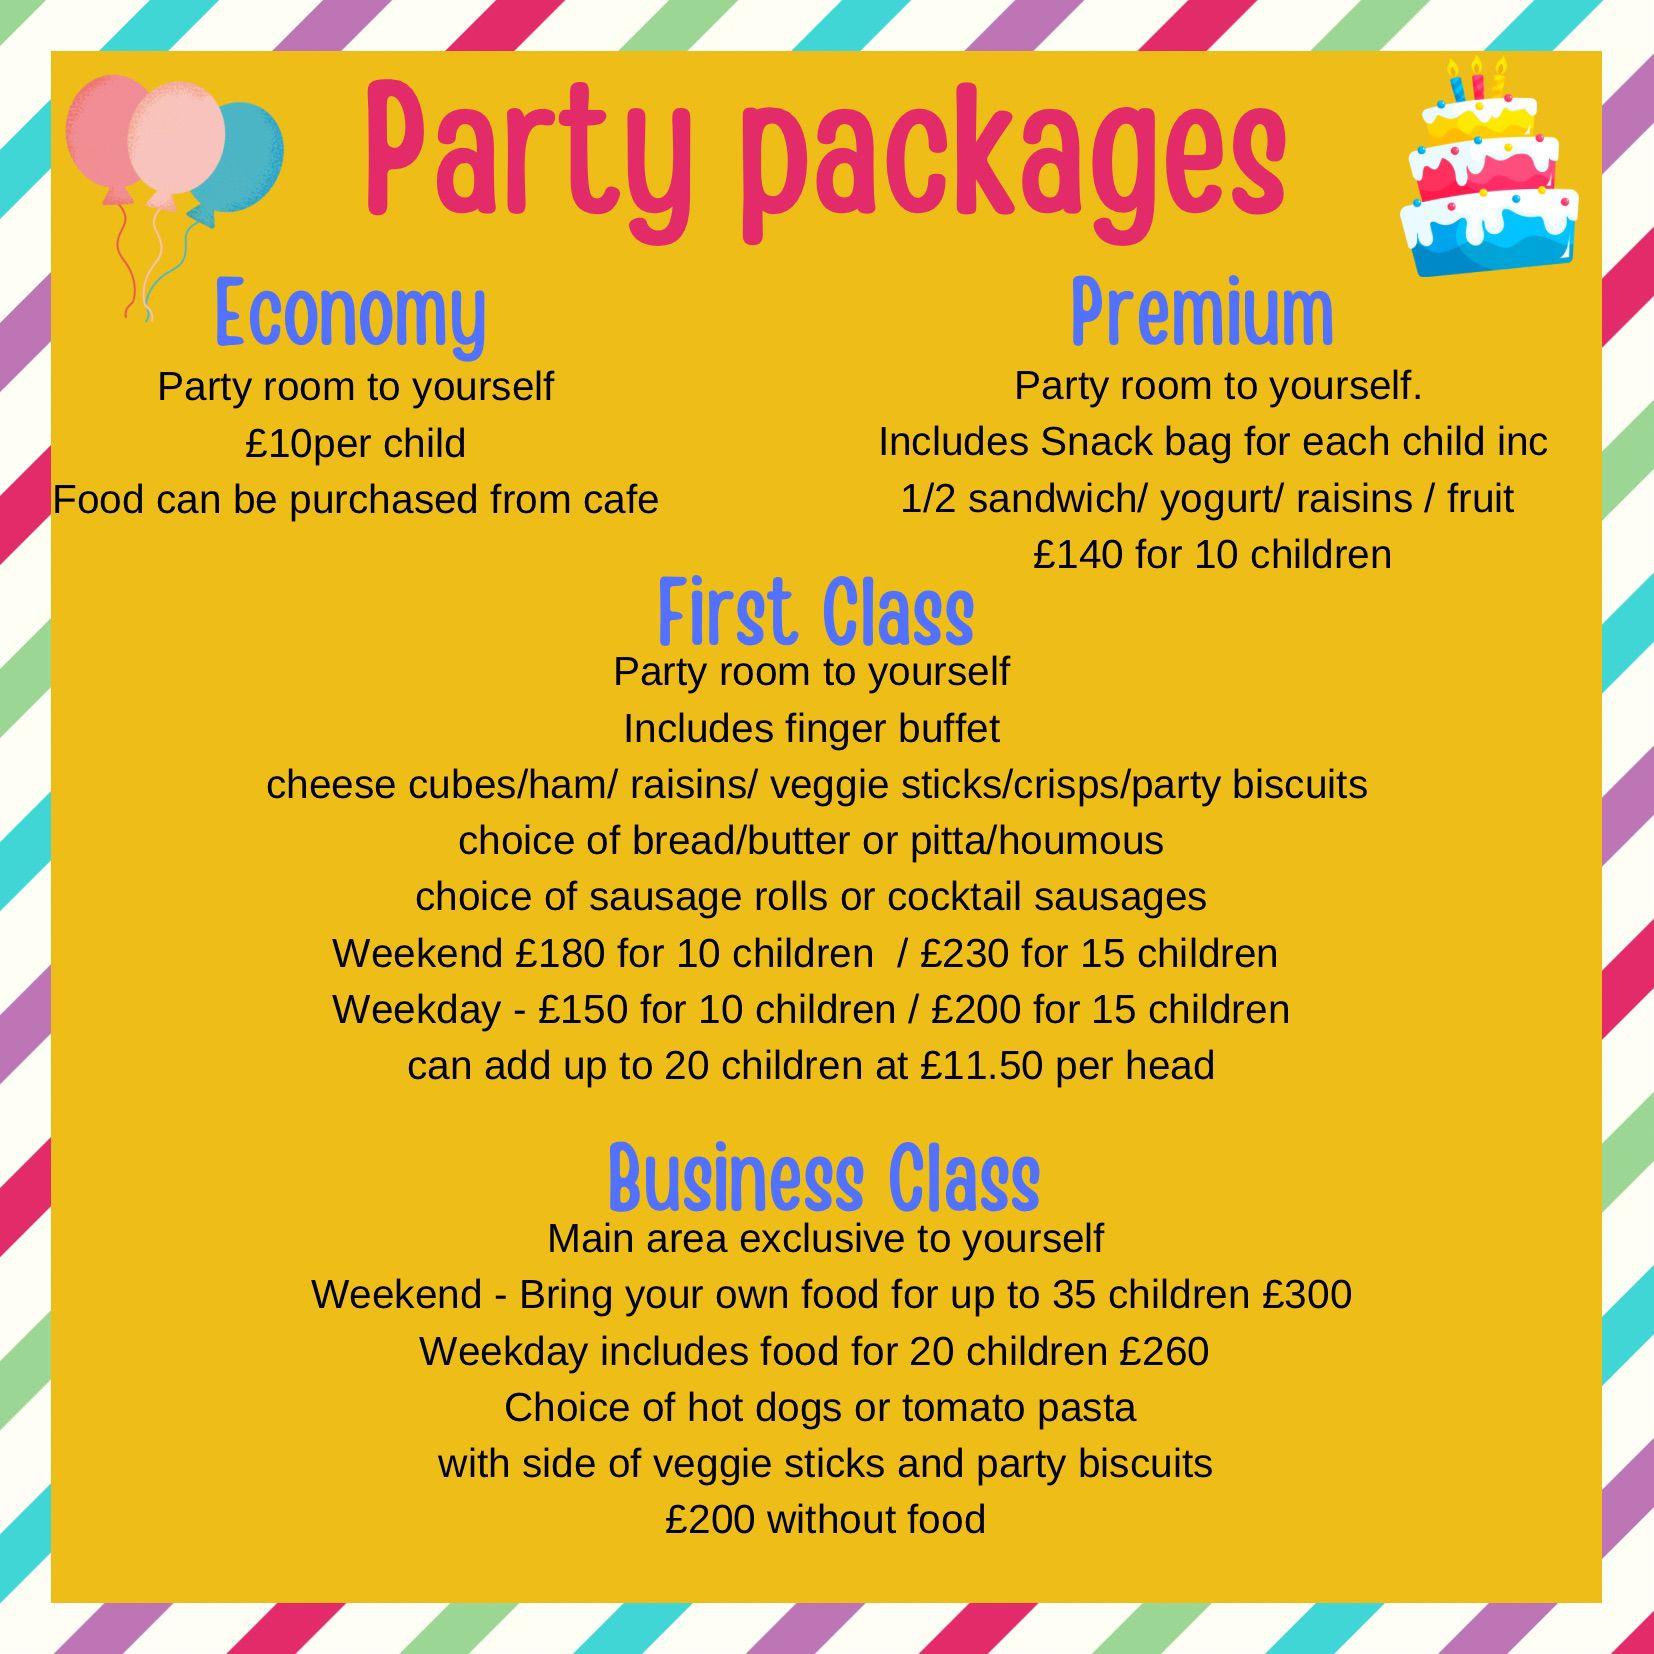 PartyPackages1